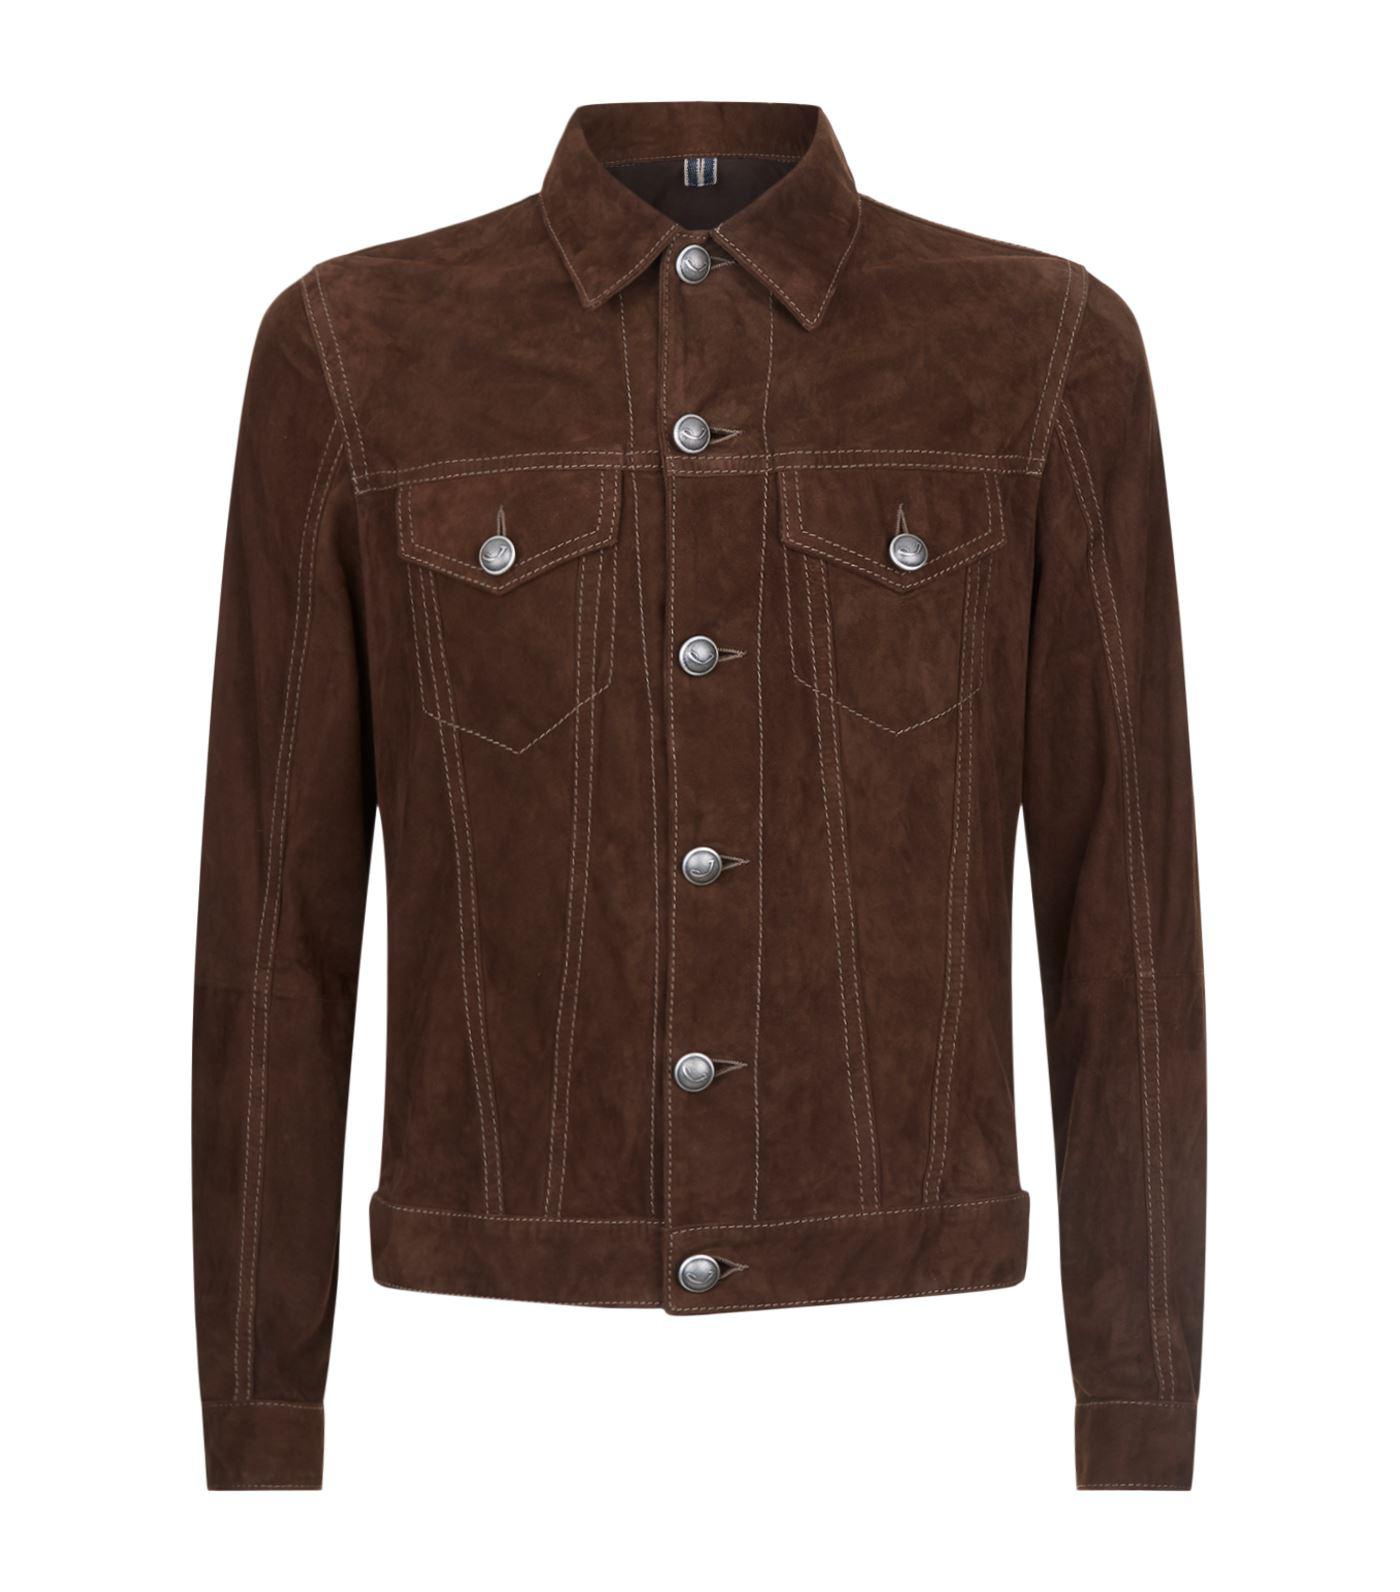 Lyst - Jacob Cohen Suede Jacket in Brown for Men